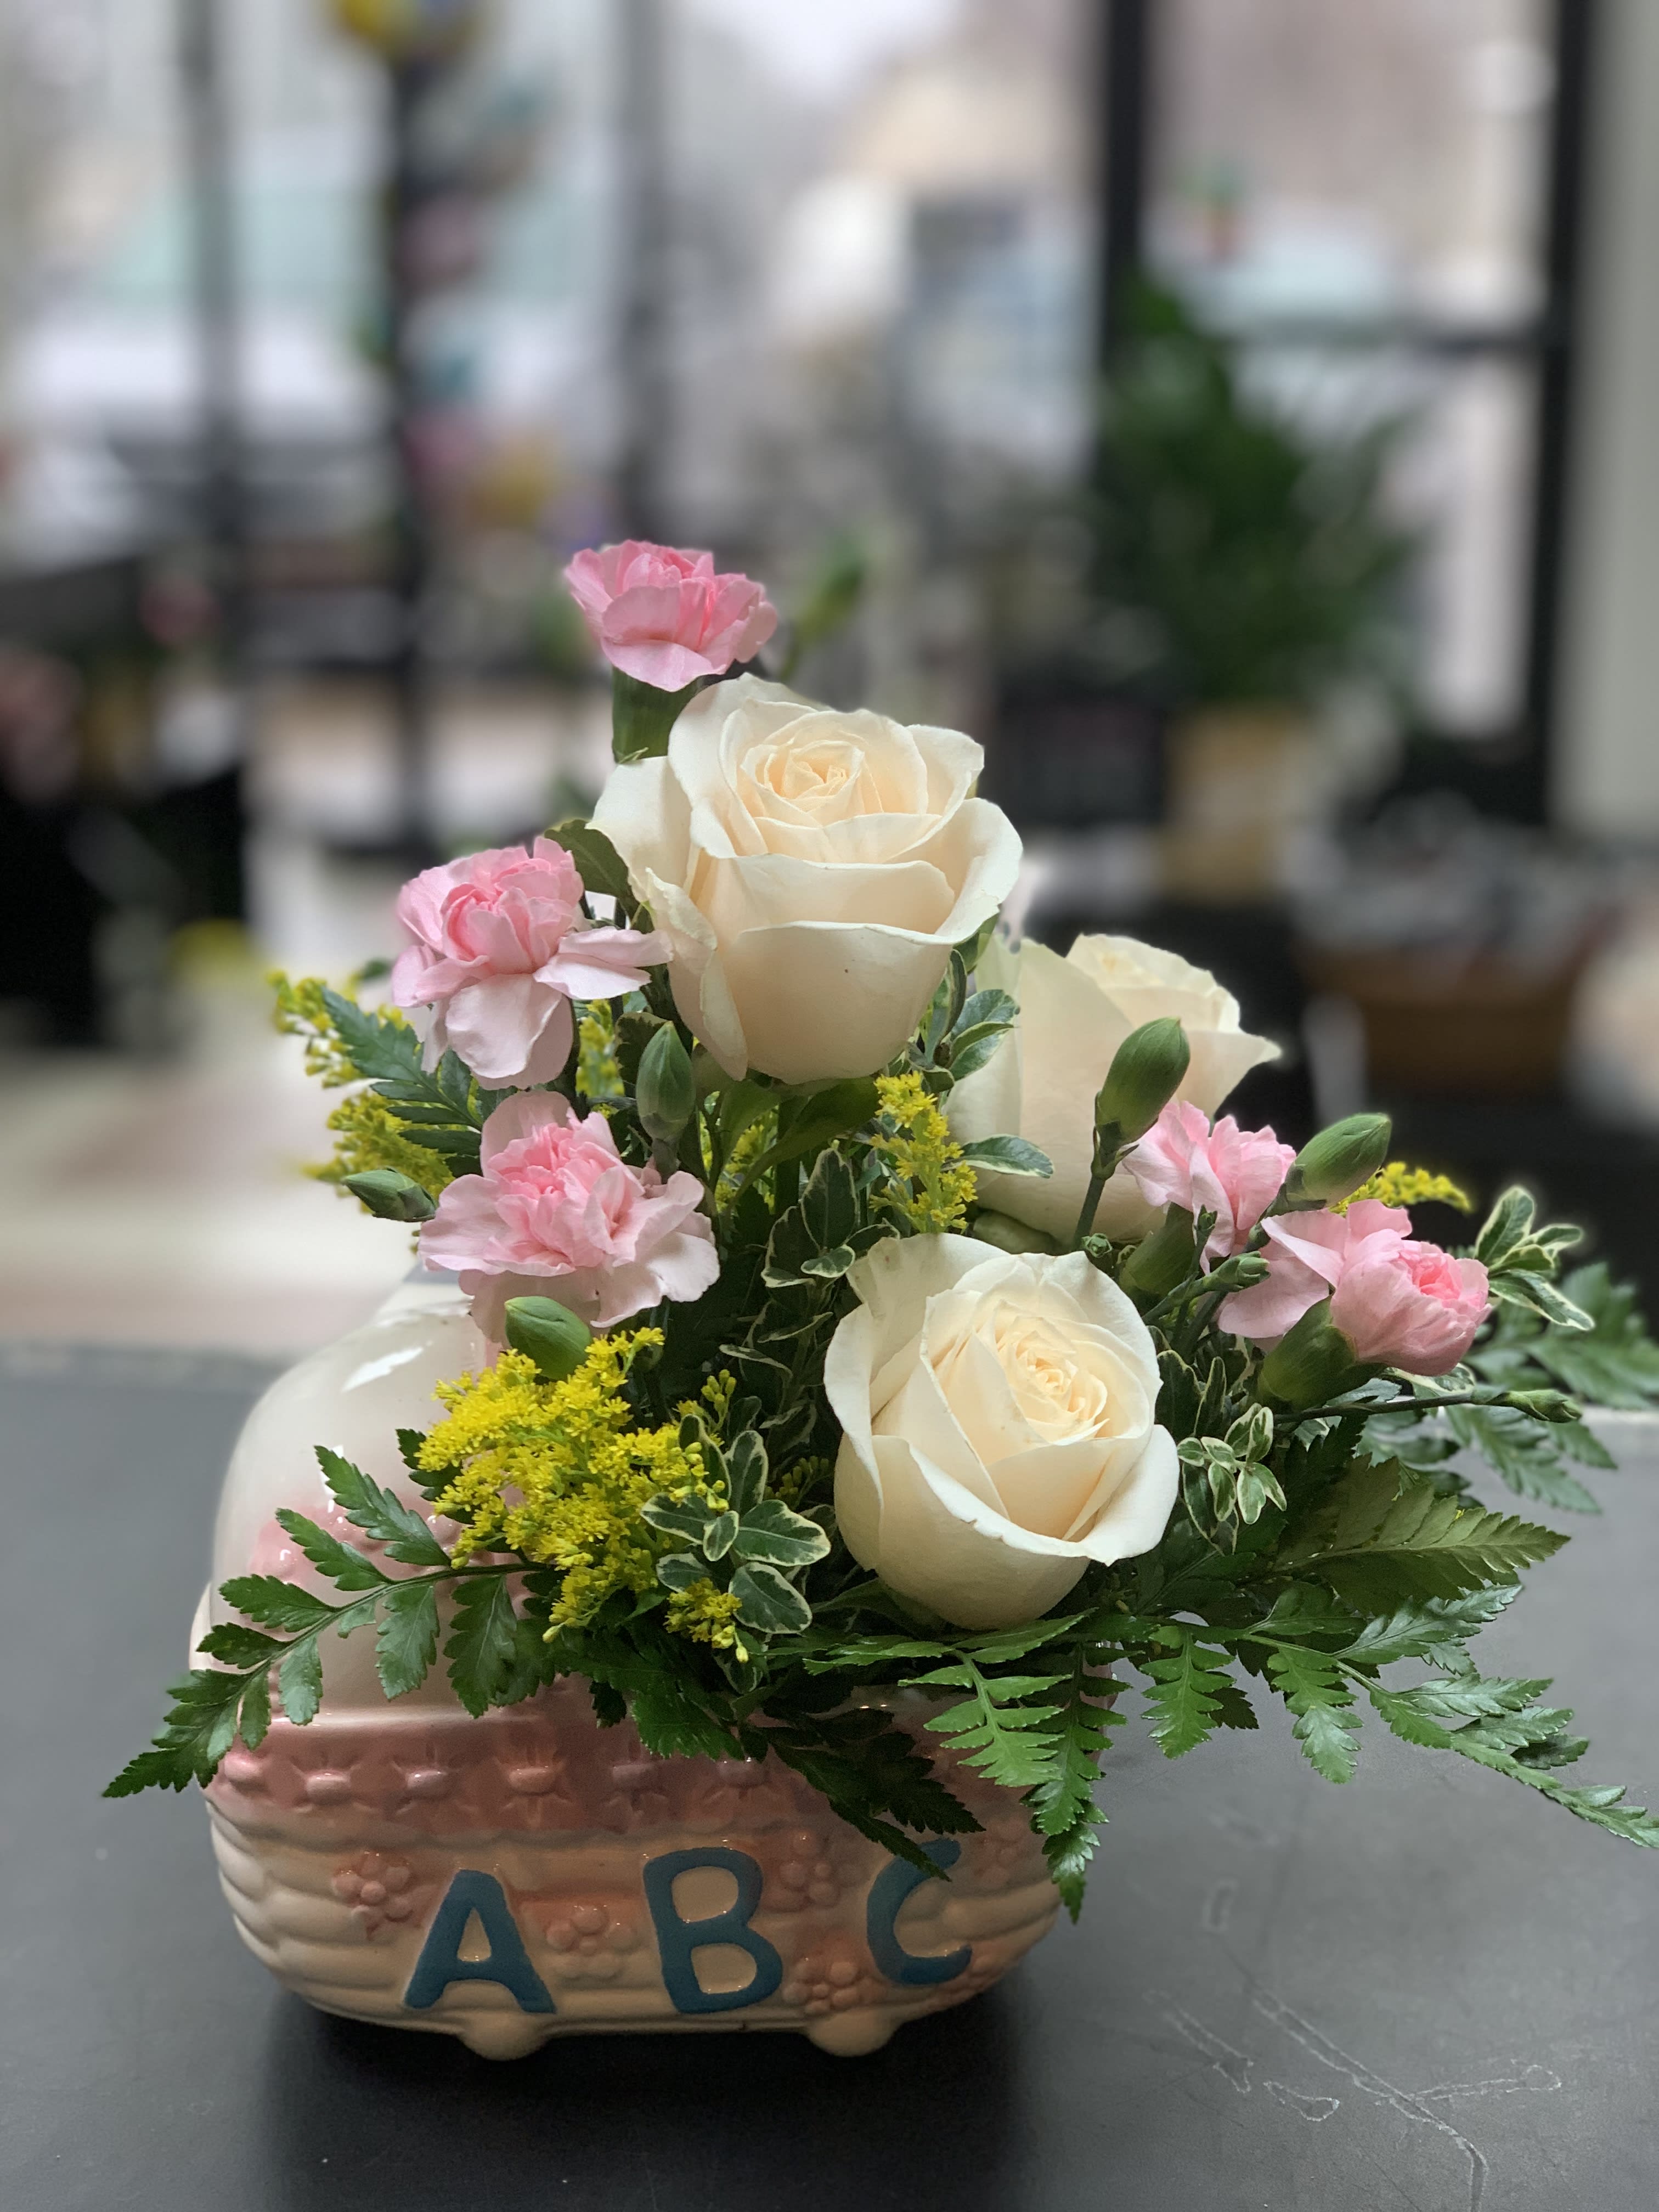 Baby Girl - Congratulate the new family on their darling precious baby girl! Fresh white and pink flowers Container may vary Standard bouquet is approximately 9&quot;H x 7&quot;W.